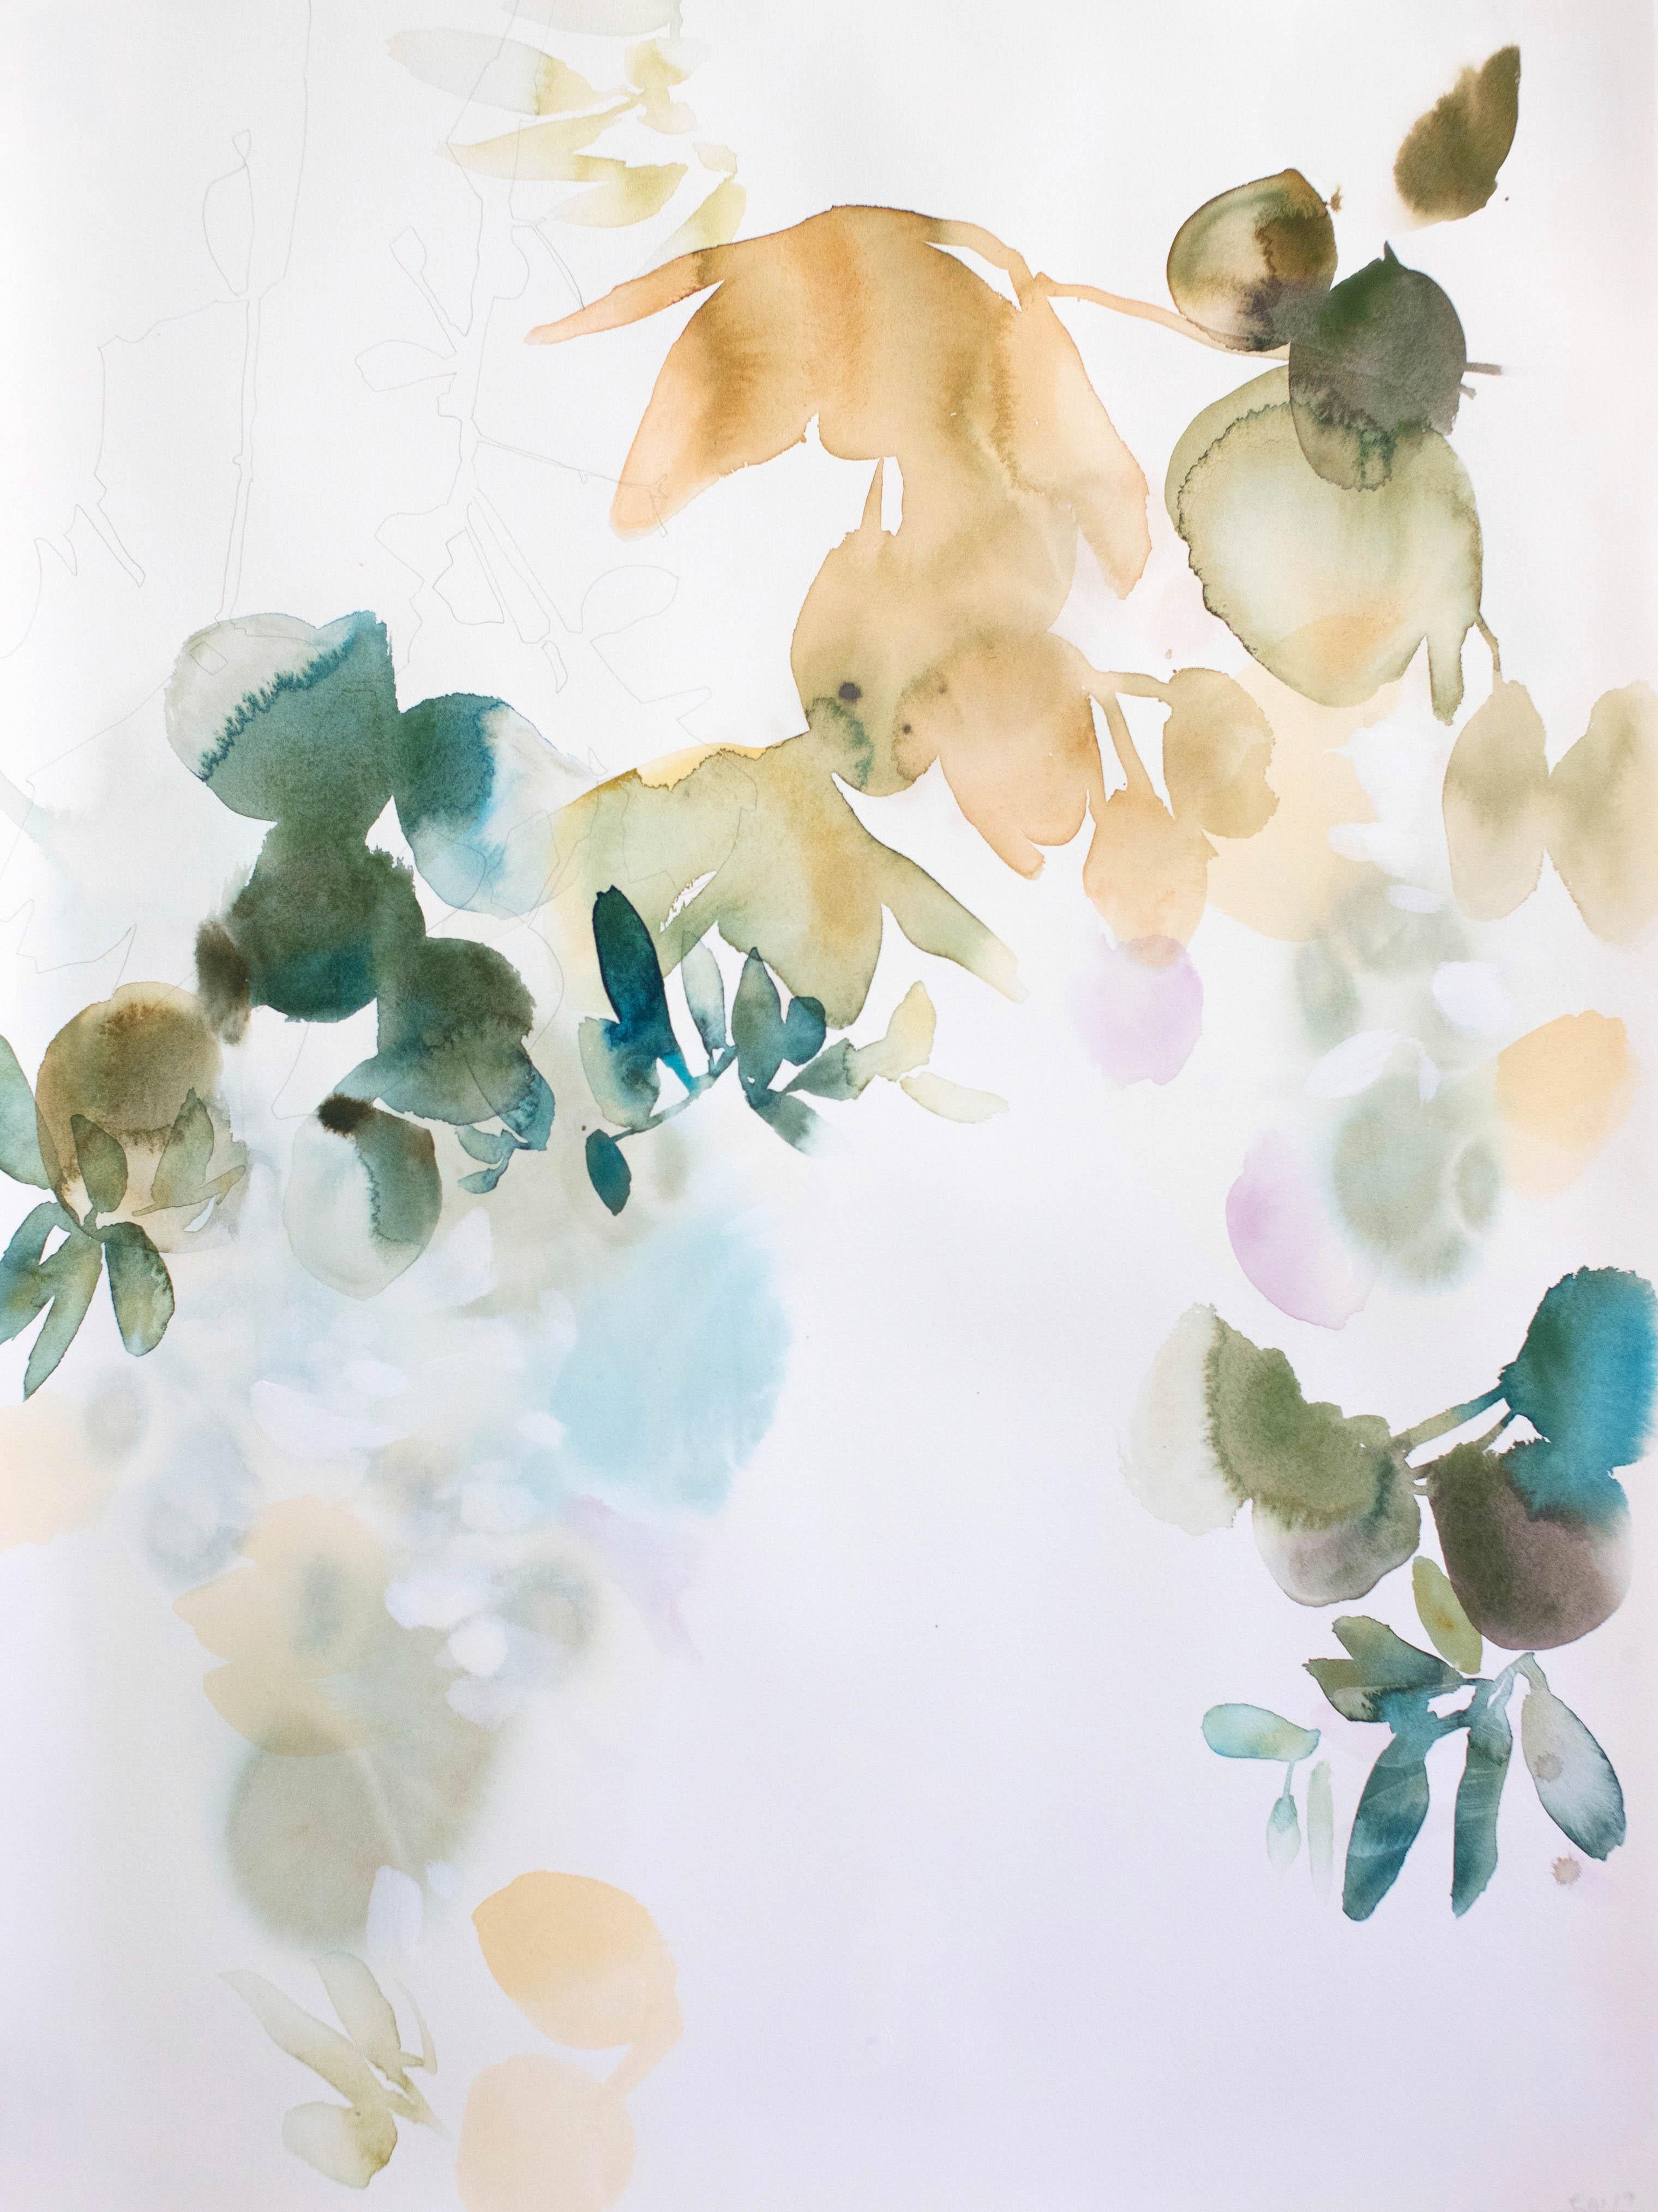 Elise Morris
Certain Rarity 2, 2019
acrylic and graphite on paper
30 x 22 in

This delicate painting on paper features abstracted, painterly leaves and floral imagery in shades of blue, green, and pink.

"For me, painting is an intuitive process of